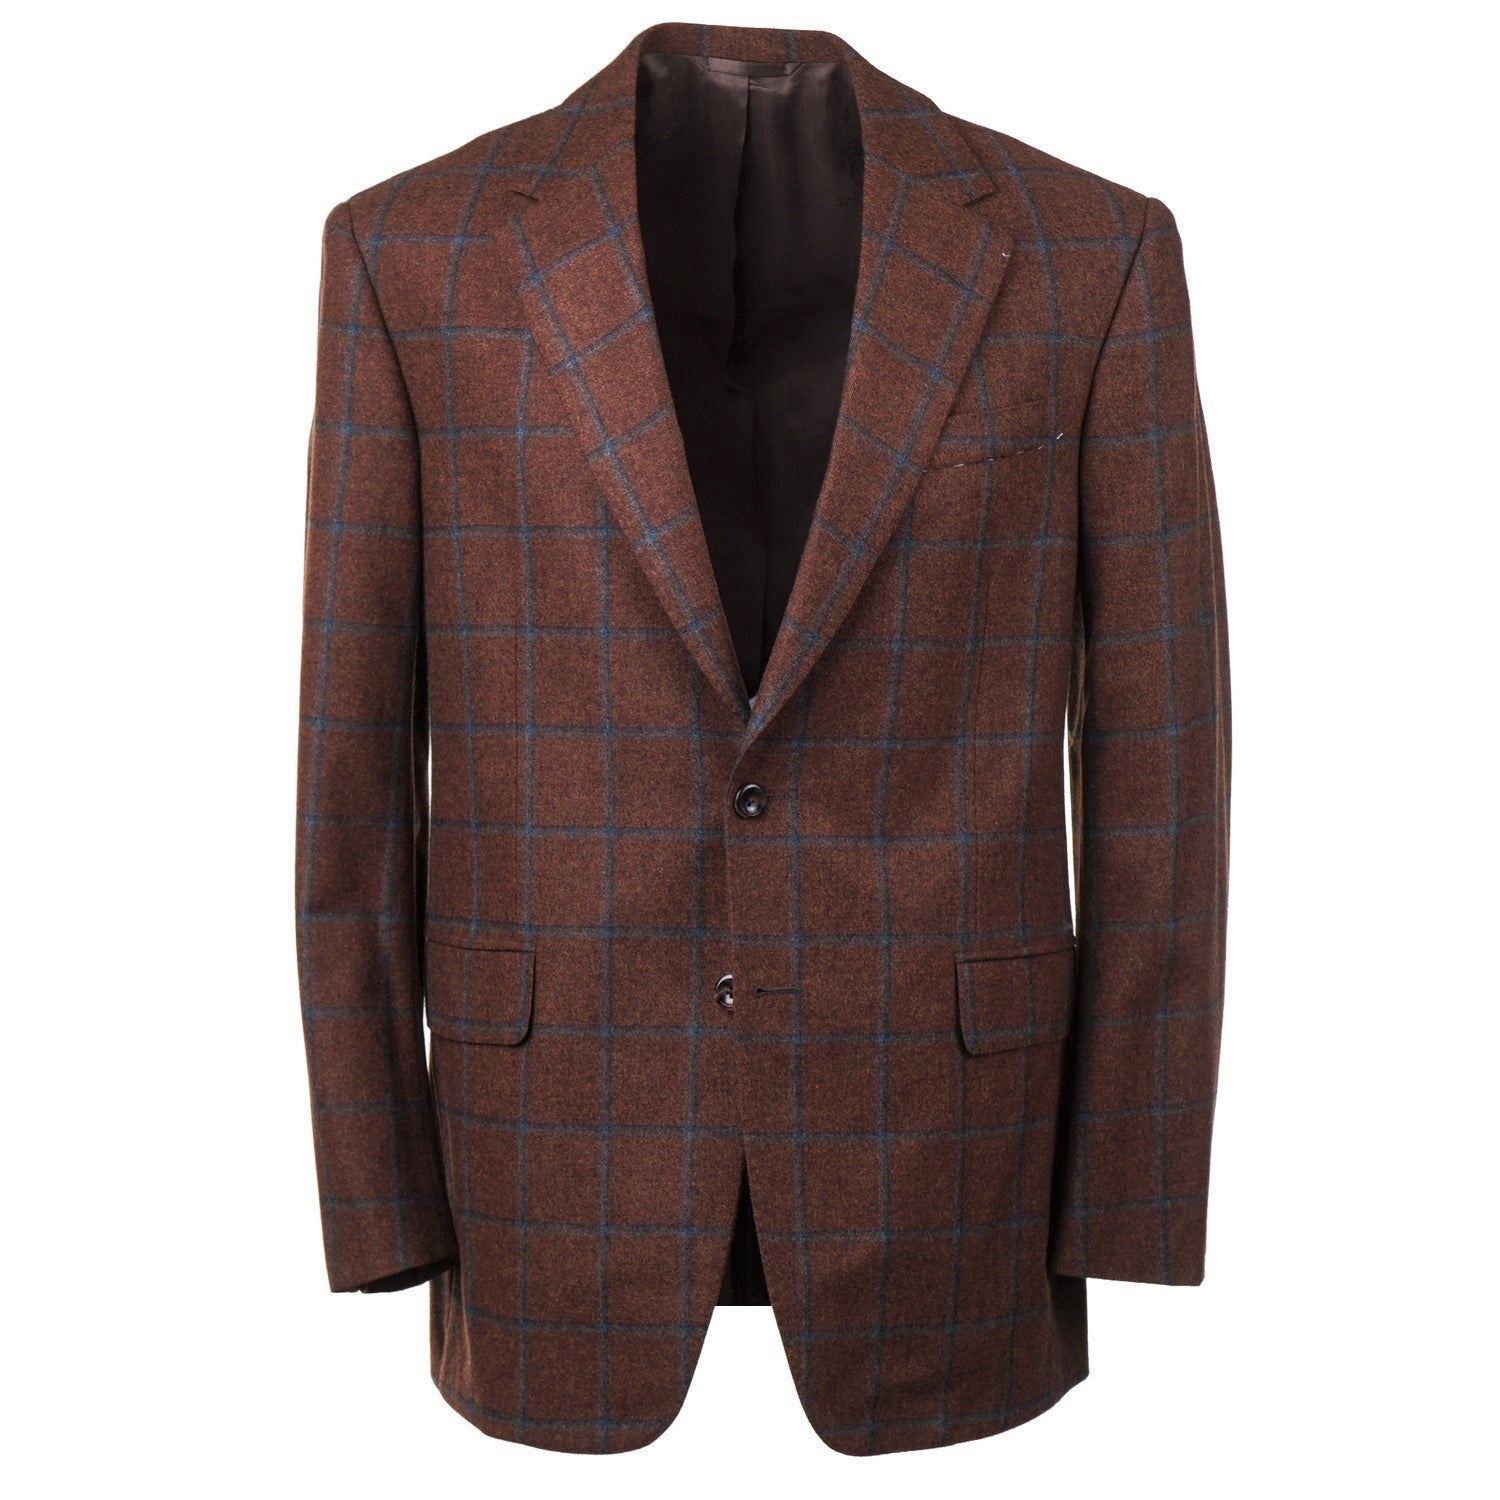 Oxxford Flannel Wool and Cashmere Sport Coat - Top Shelf Apparel